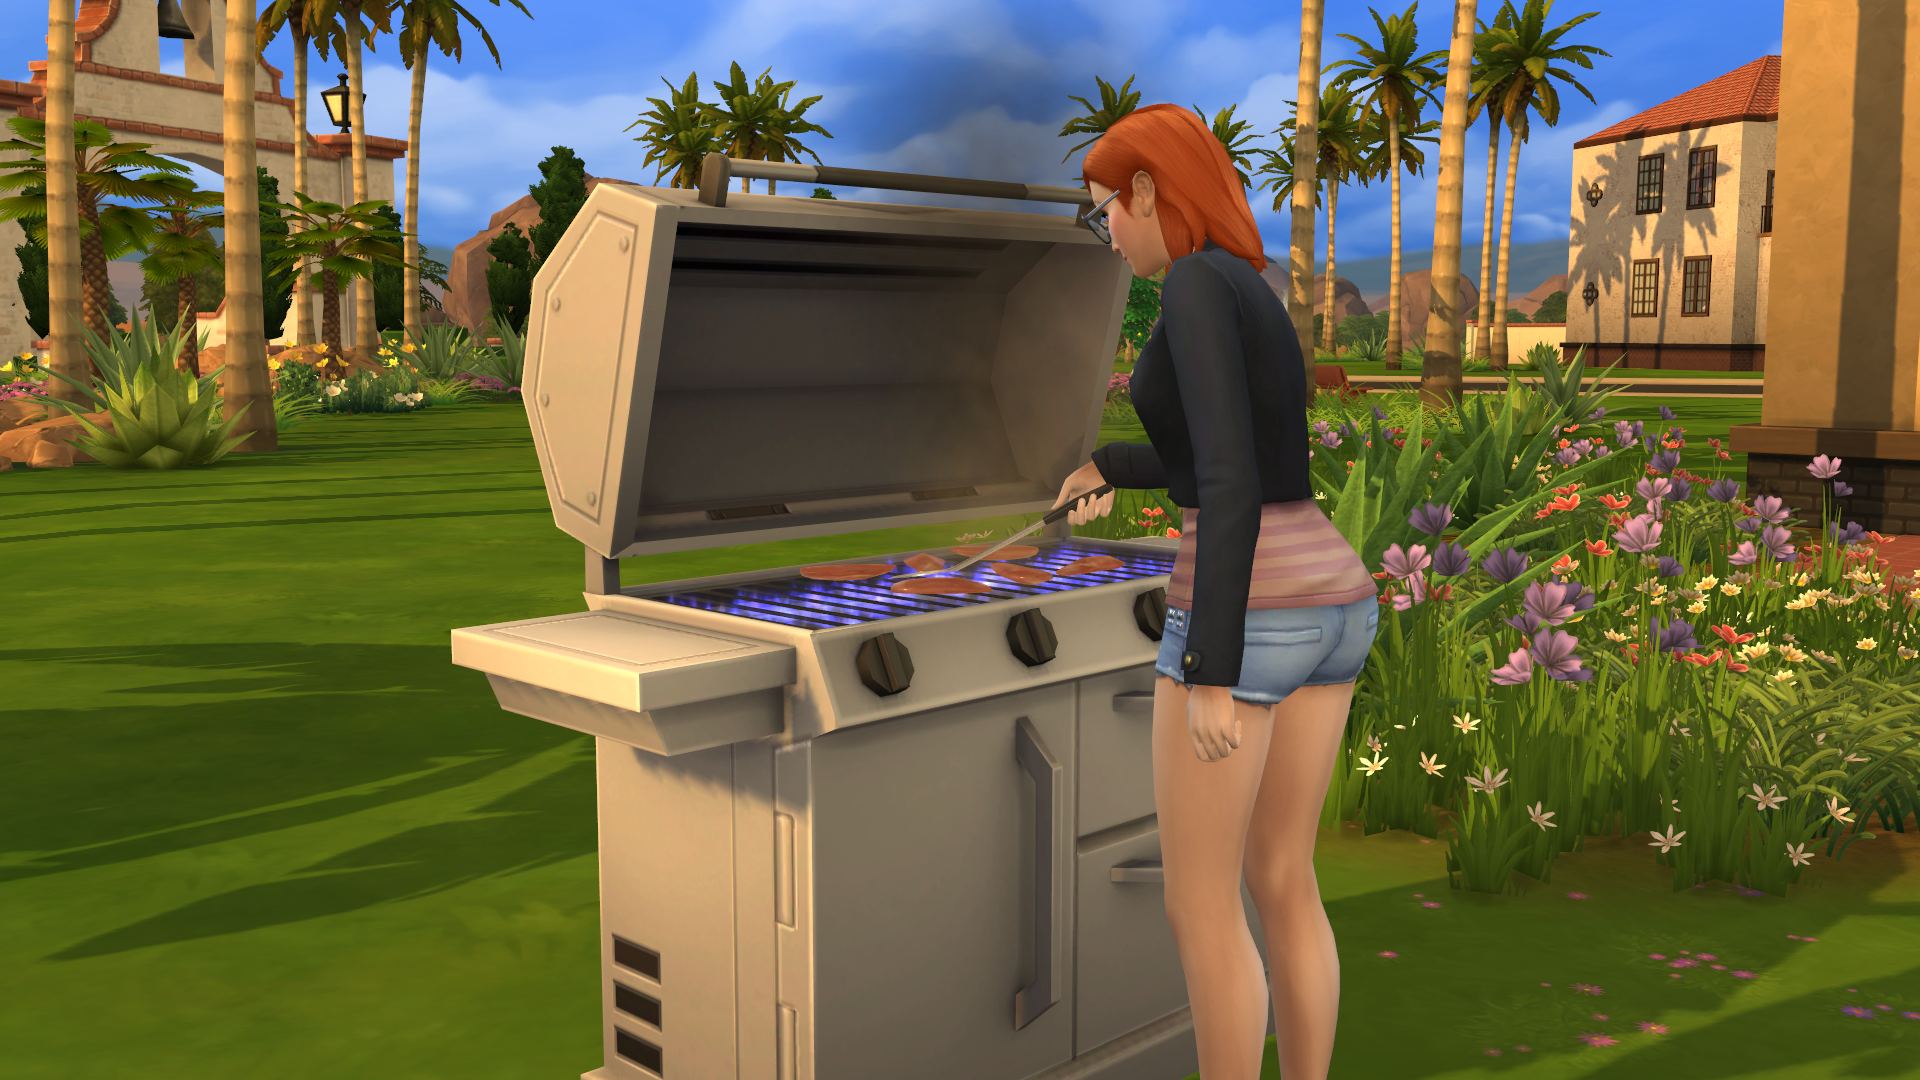 How To Max Cooking Skill Cheat (Level Up Skills Cheats) - The Sims 4 